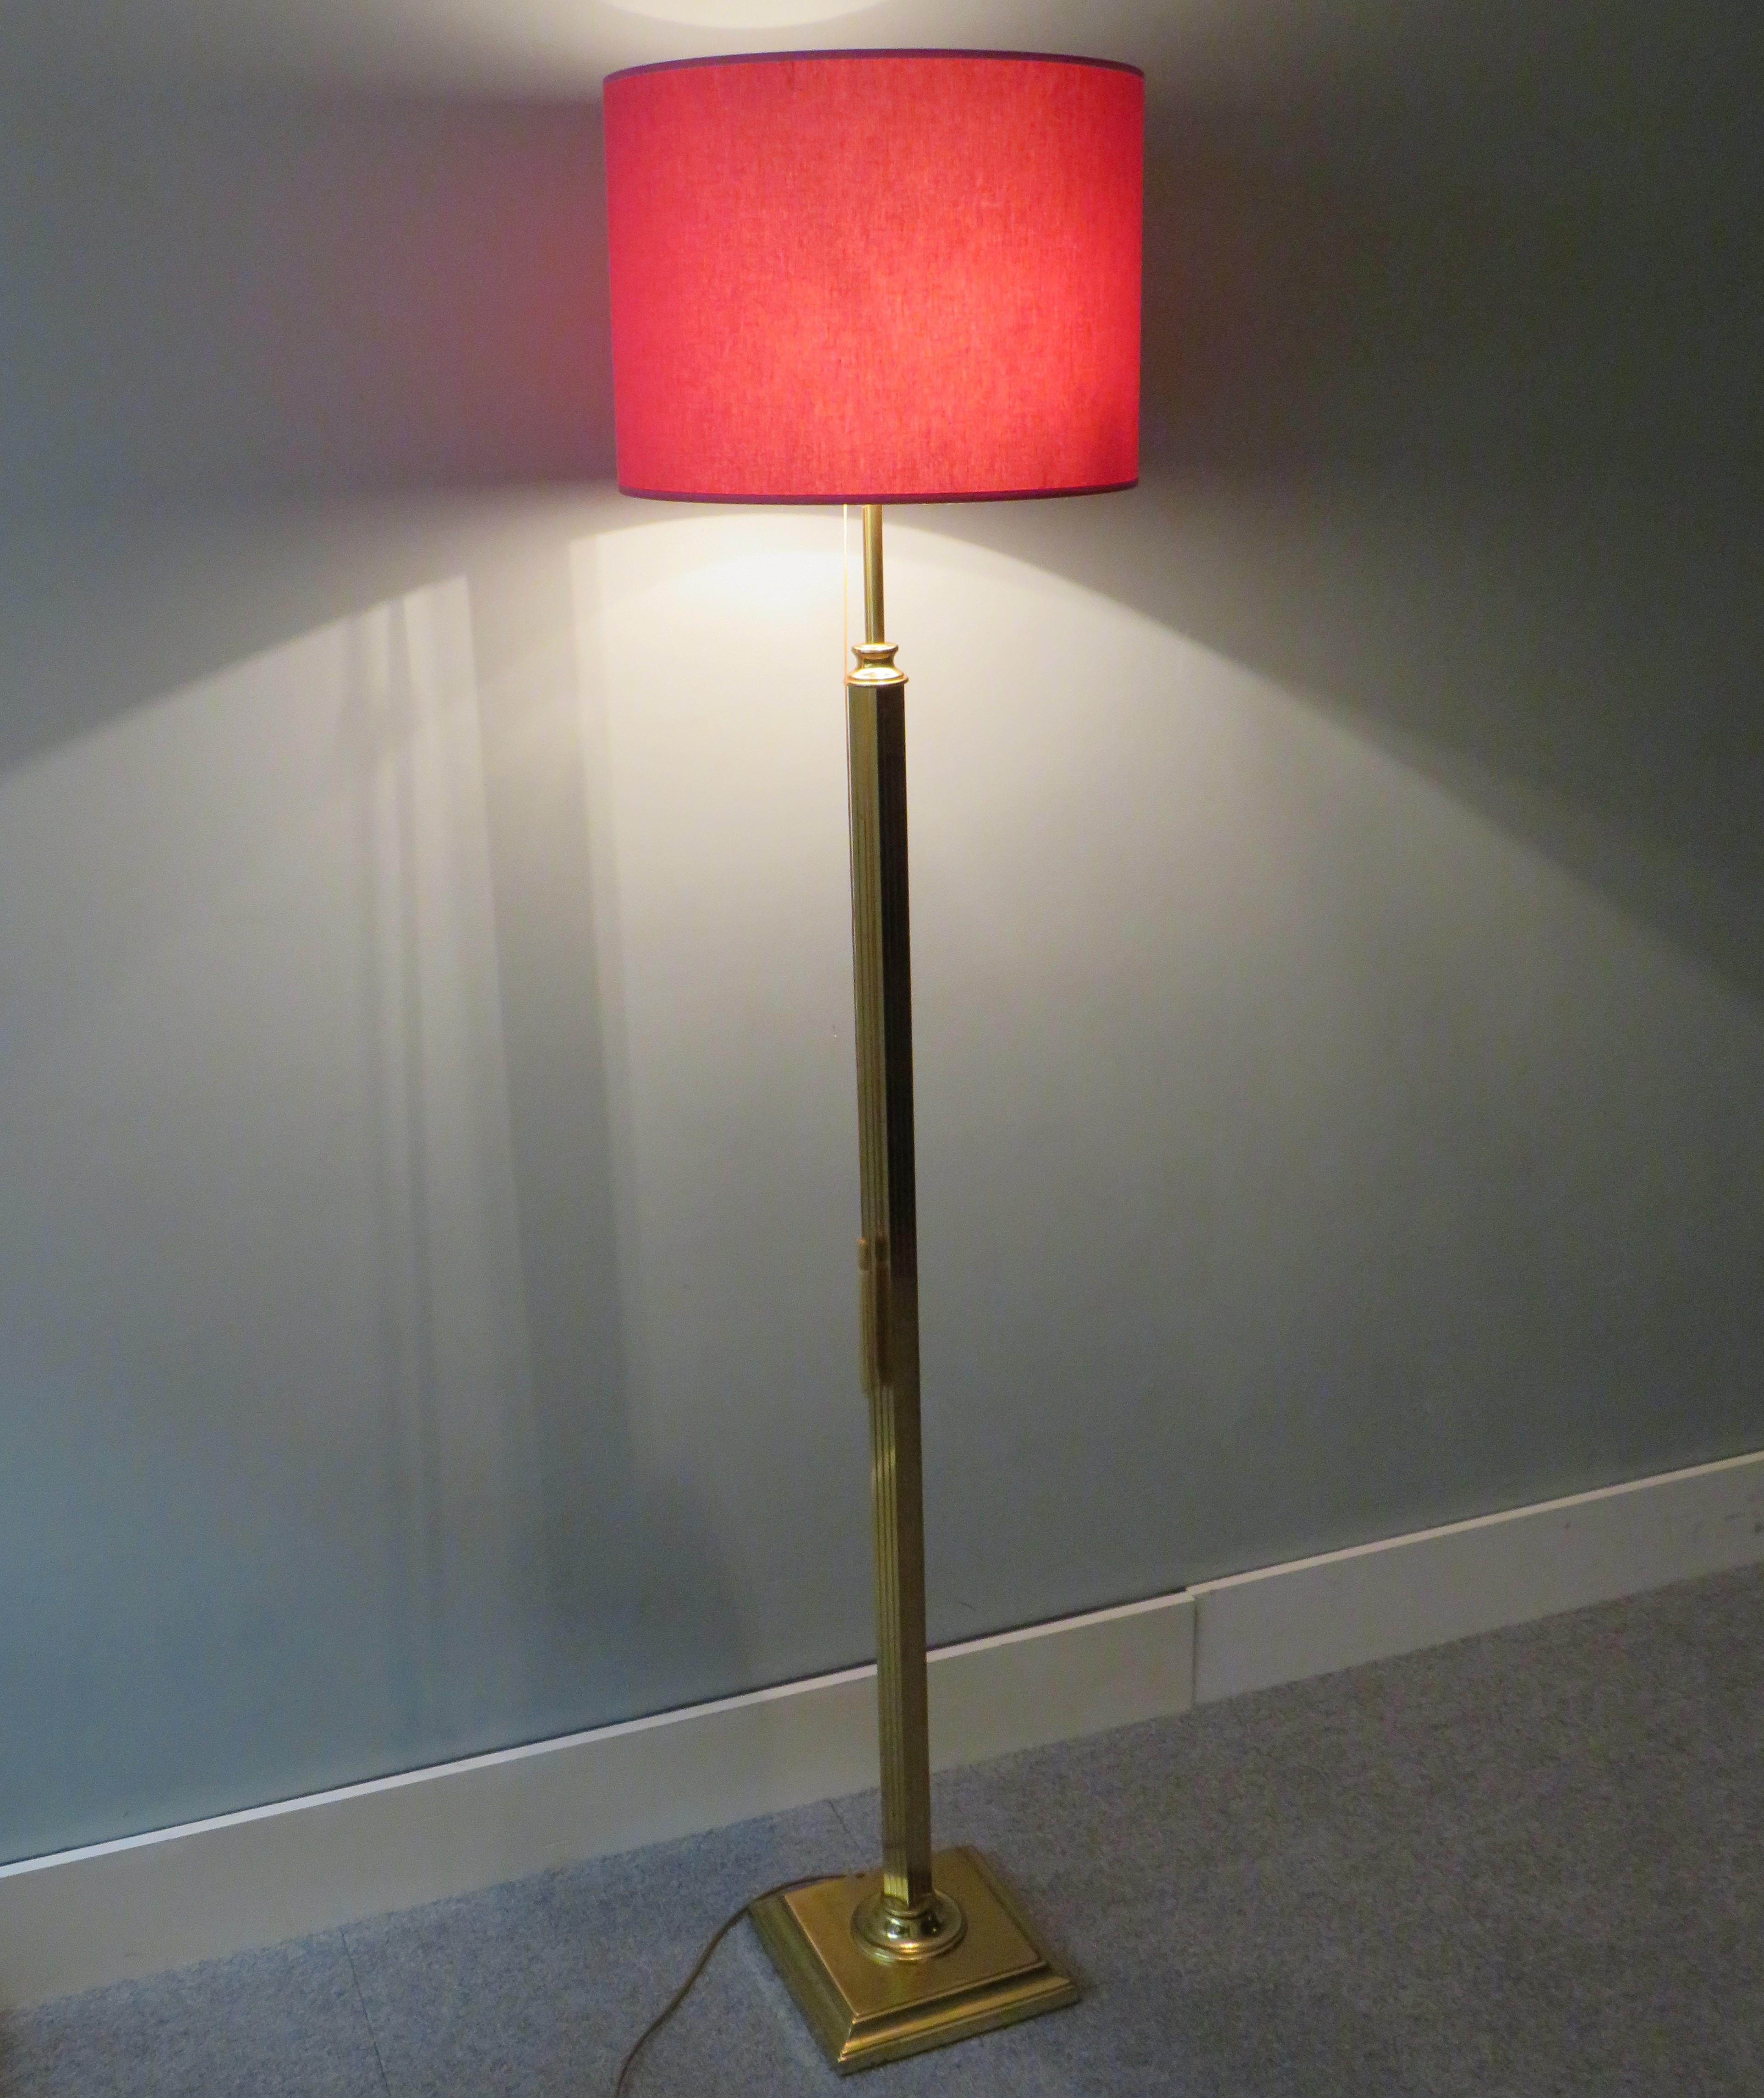 Hollywood regency style brass floor lamp attributed to Belgochrom, Belgium 1970s.
The square cascading foot ends in a square ribbed column.
There are 2 E 27 fittings that can be lit separately or together by a pulling cord.
The lamp is provided